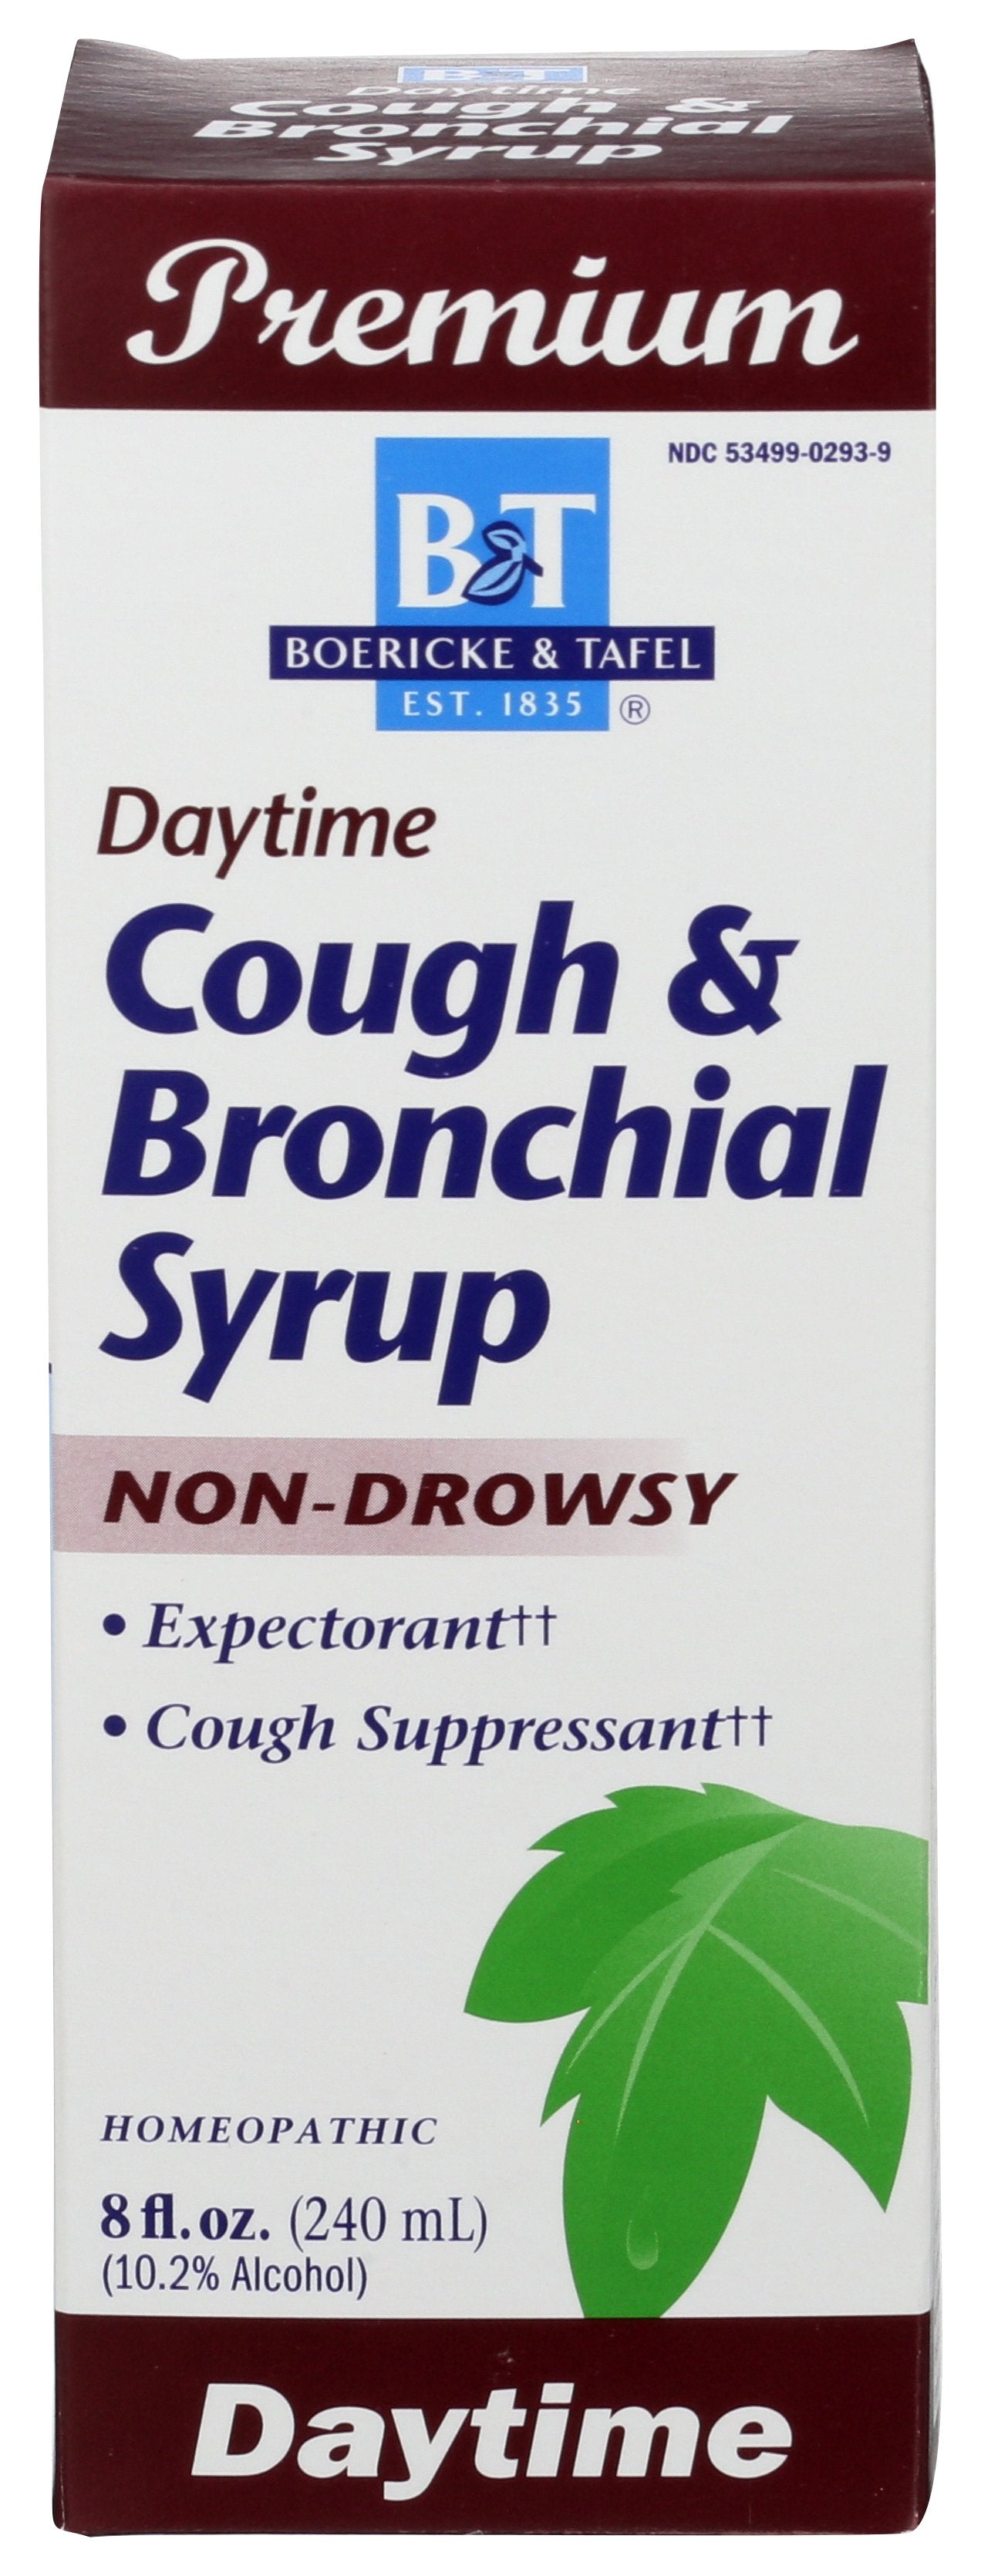 NATURES WAY B&T SYRUPCOUGH & BRNCHL 8OZ DT - Case of 3